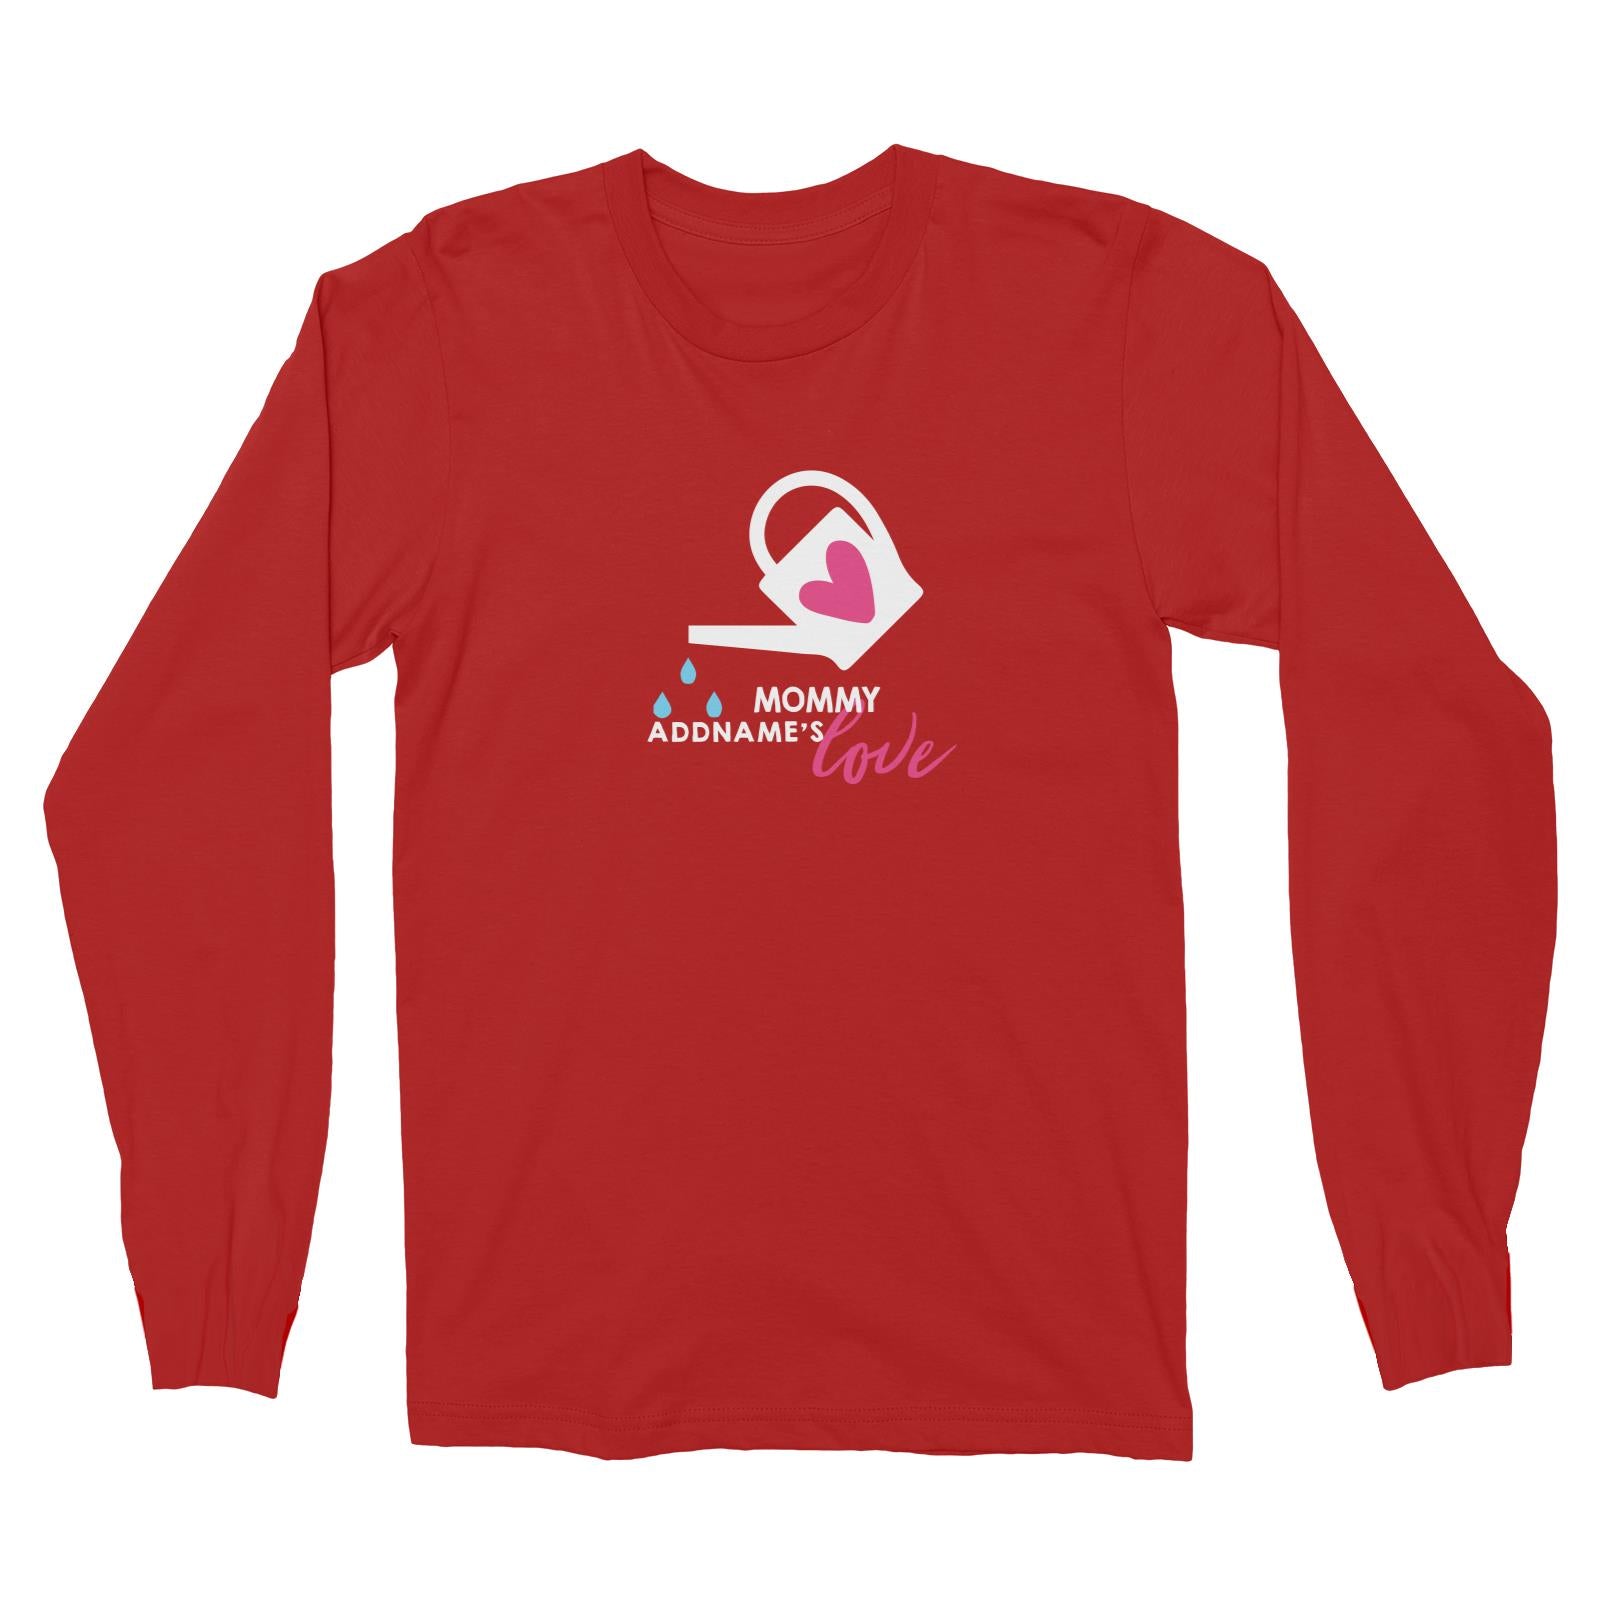 Nurturing Mommy's Love Addname Long Sleeve Unisex T-Shirt  Matching Family Personalizable Designs